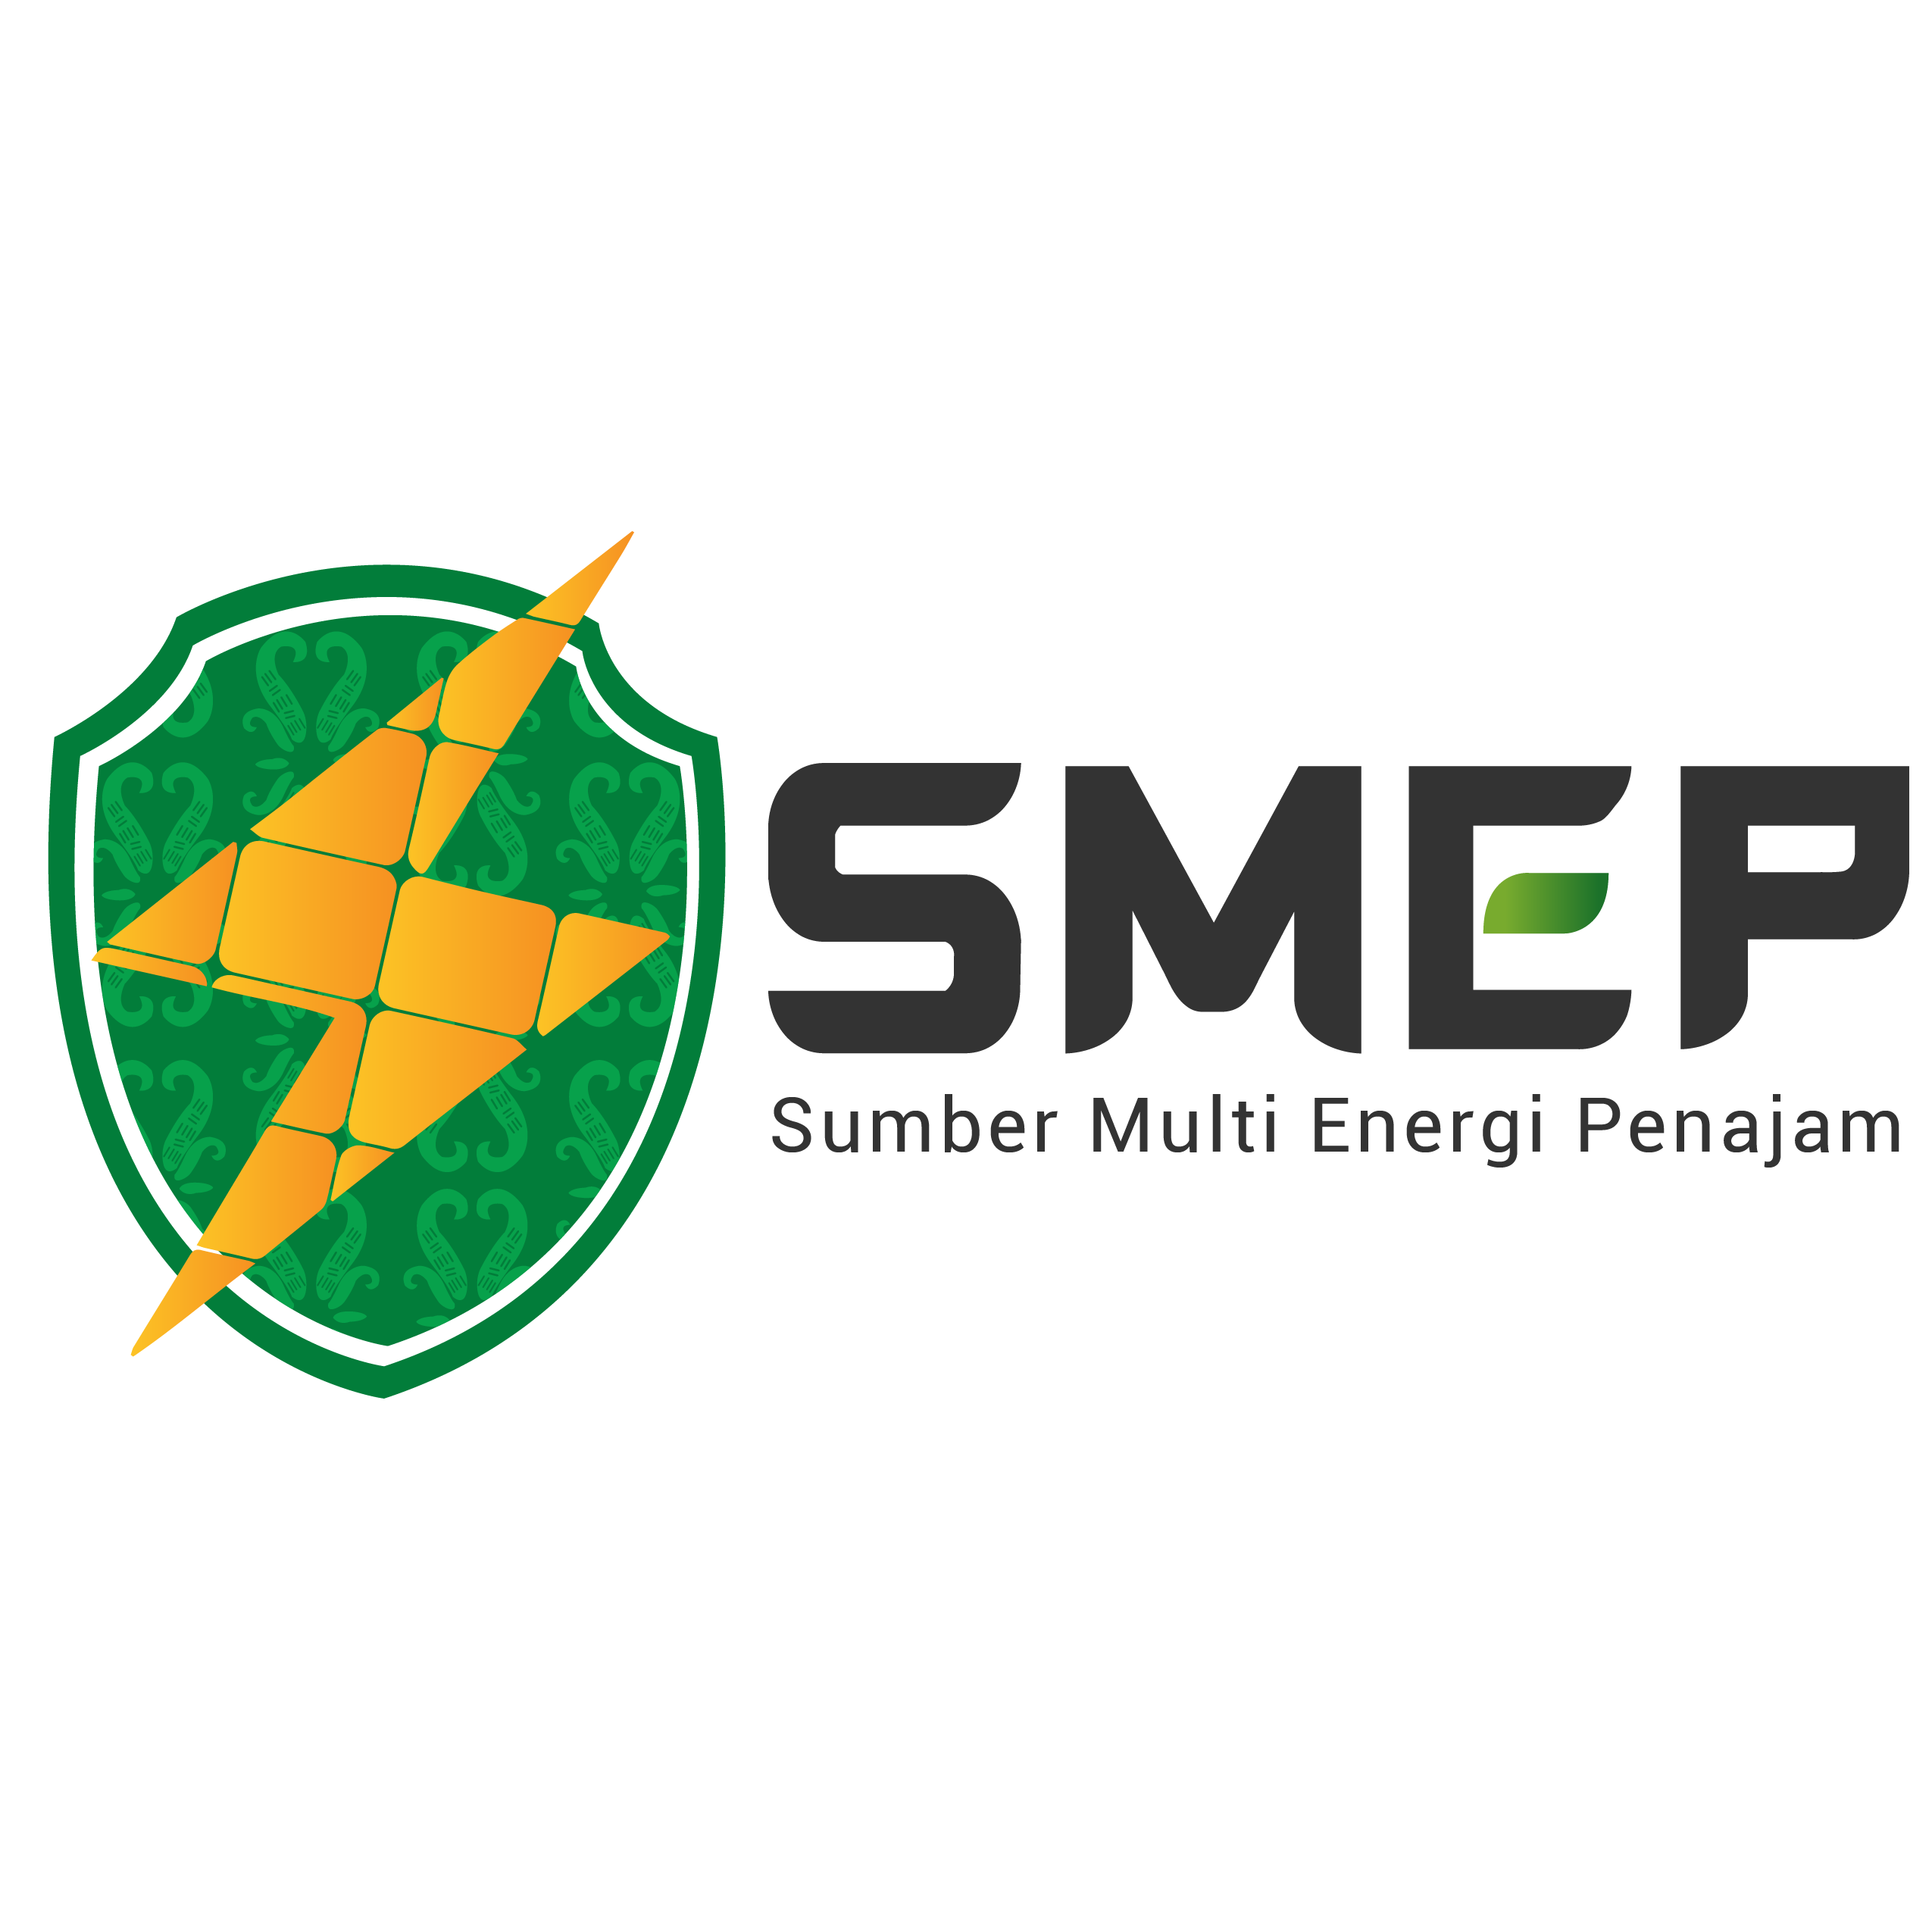 PT Sumber Multi Energi Penajam was established on June 4, 2020. The establishment of SMEP is intended to support the Indonesian government programs in renewable energy implementation on mining areas. <br><br>Project: <br>Hybrid solar leasing 409 kWp + 288 kWh Green mining microgrid Kalimantan - Indonesia
